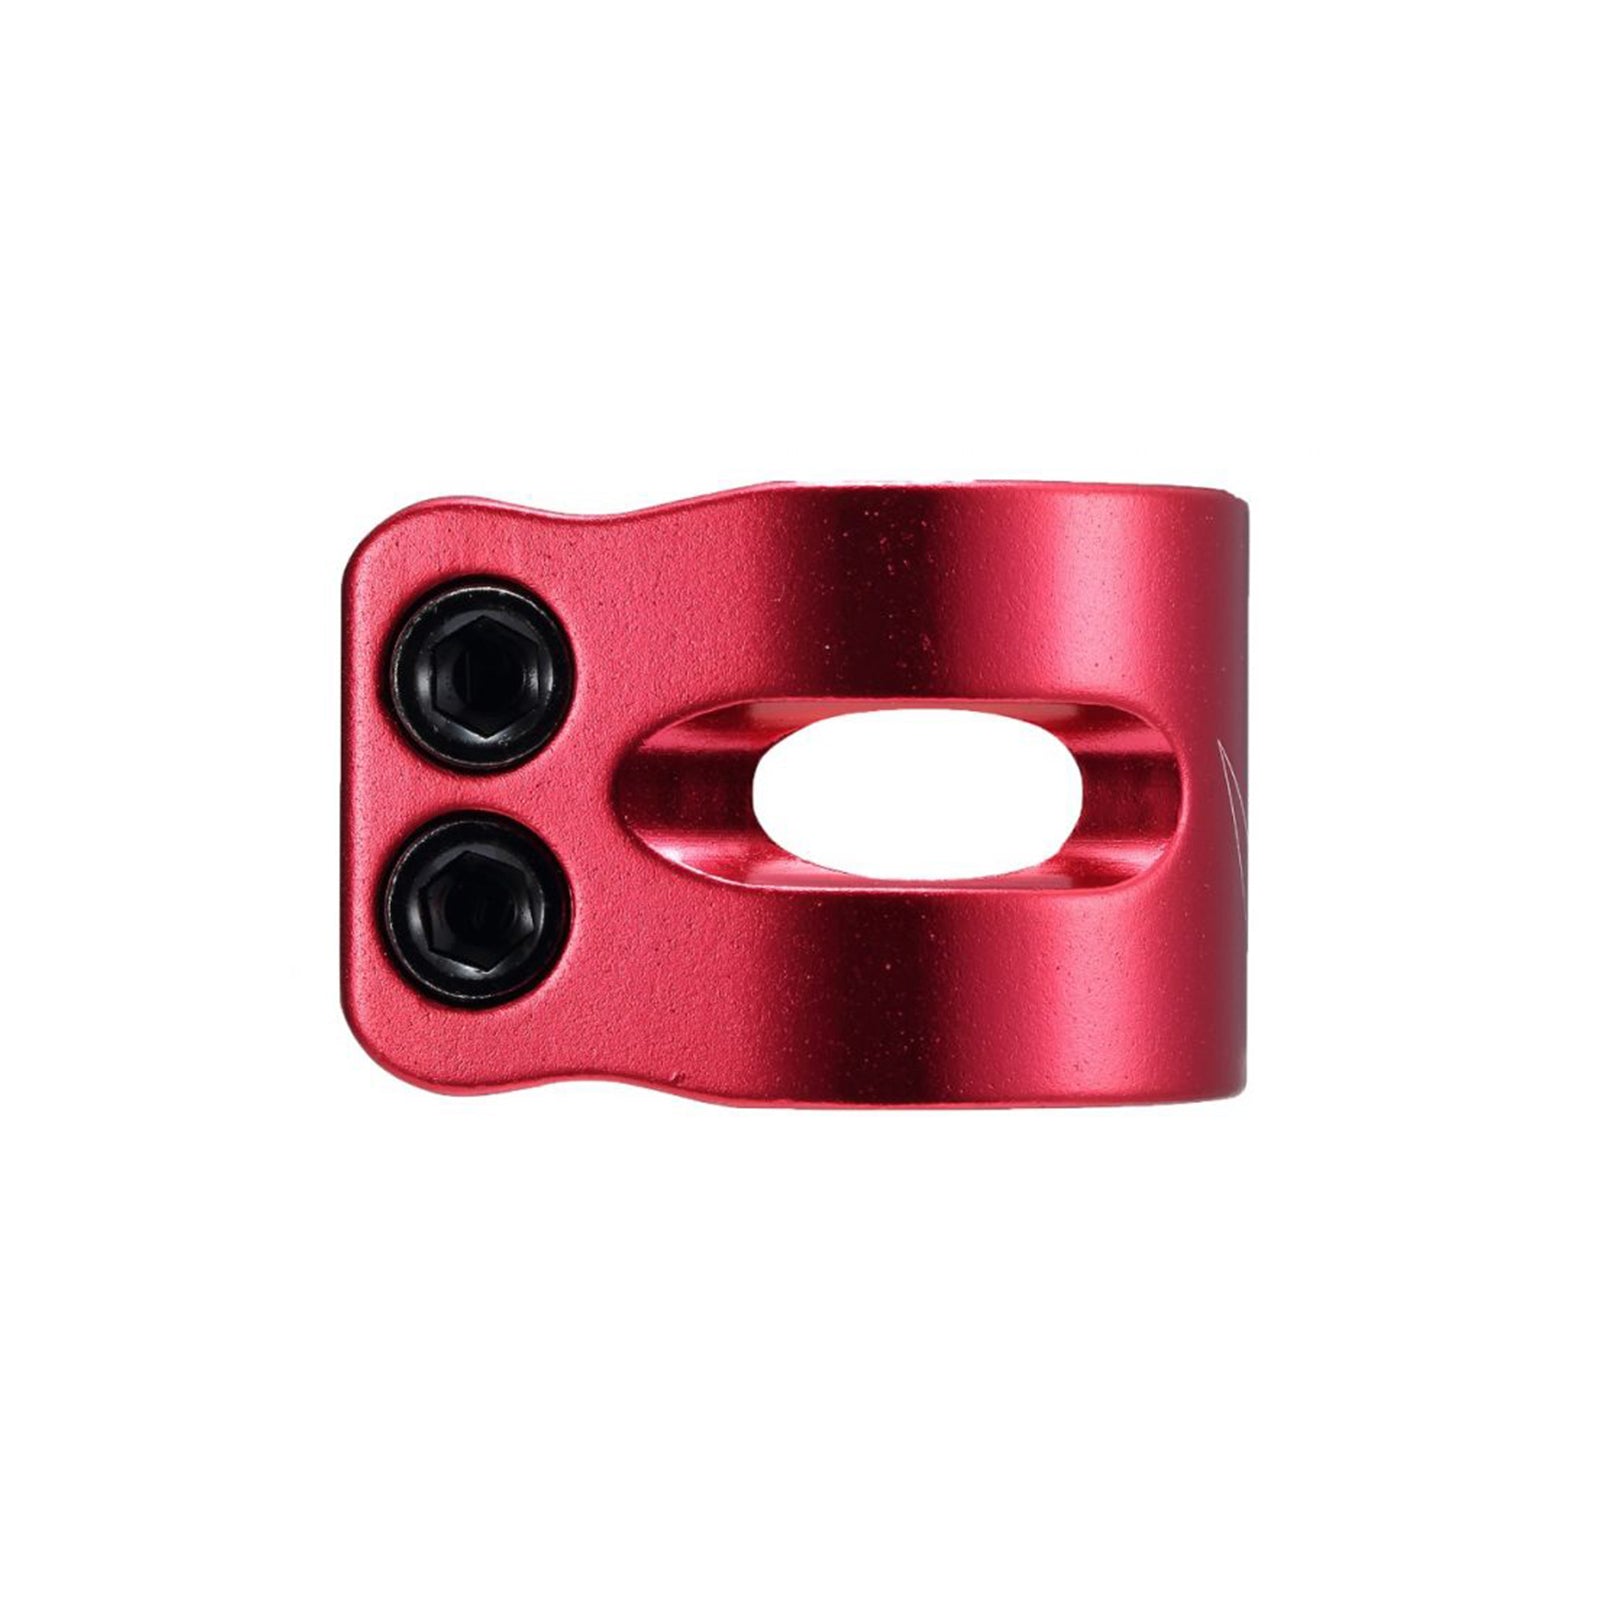 Envy Clamp Double 2 Screws Oversized Red